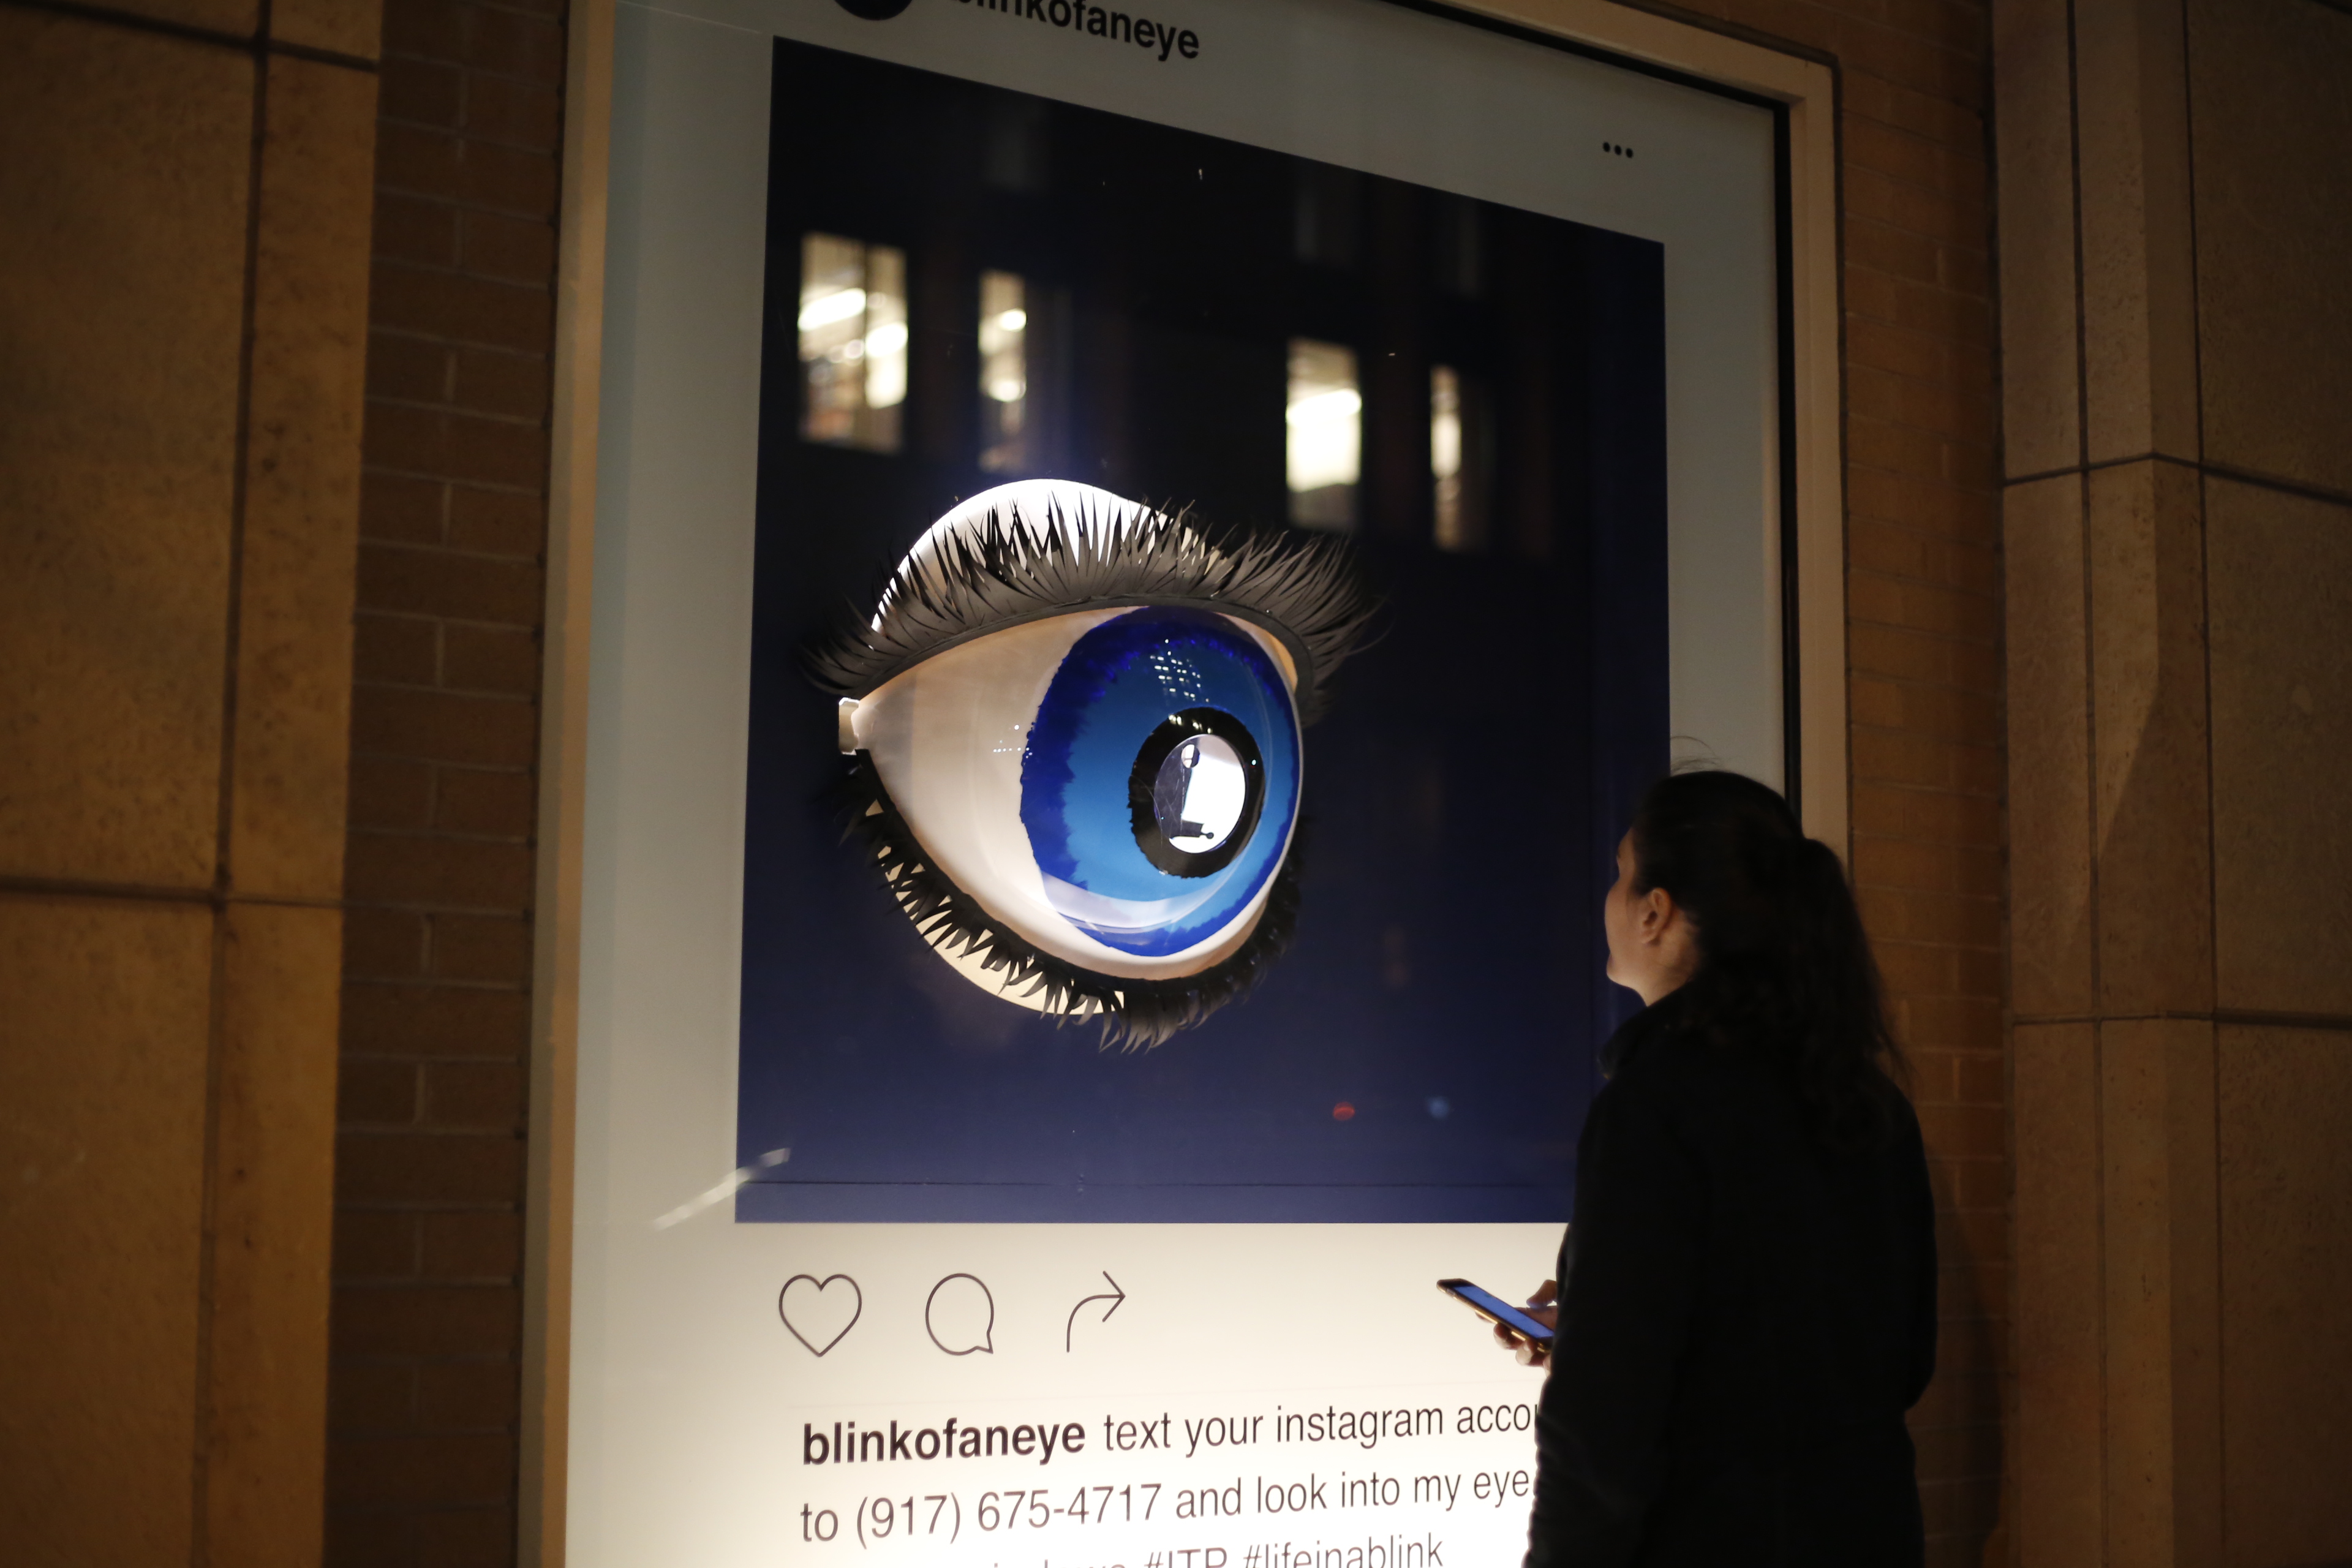 An interactive window display that flashes your life in the blink of an eye